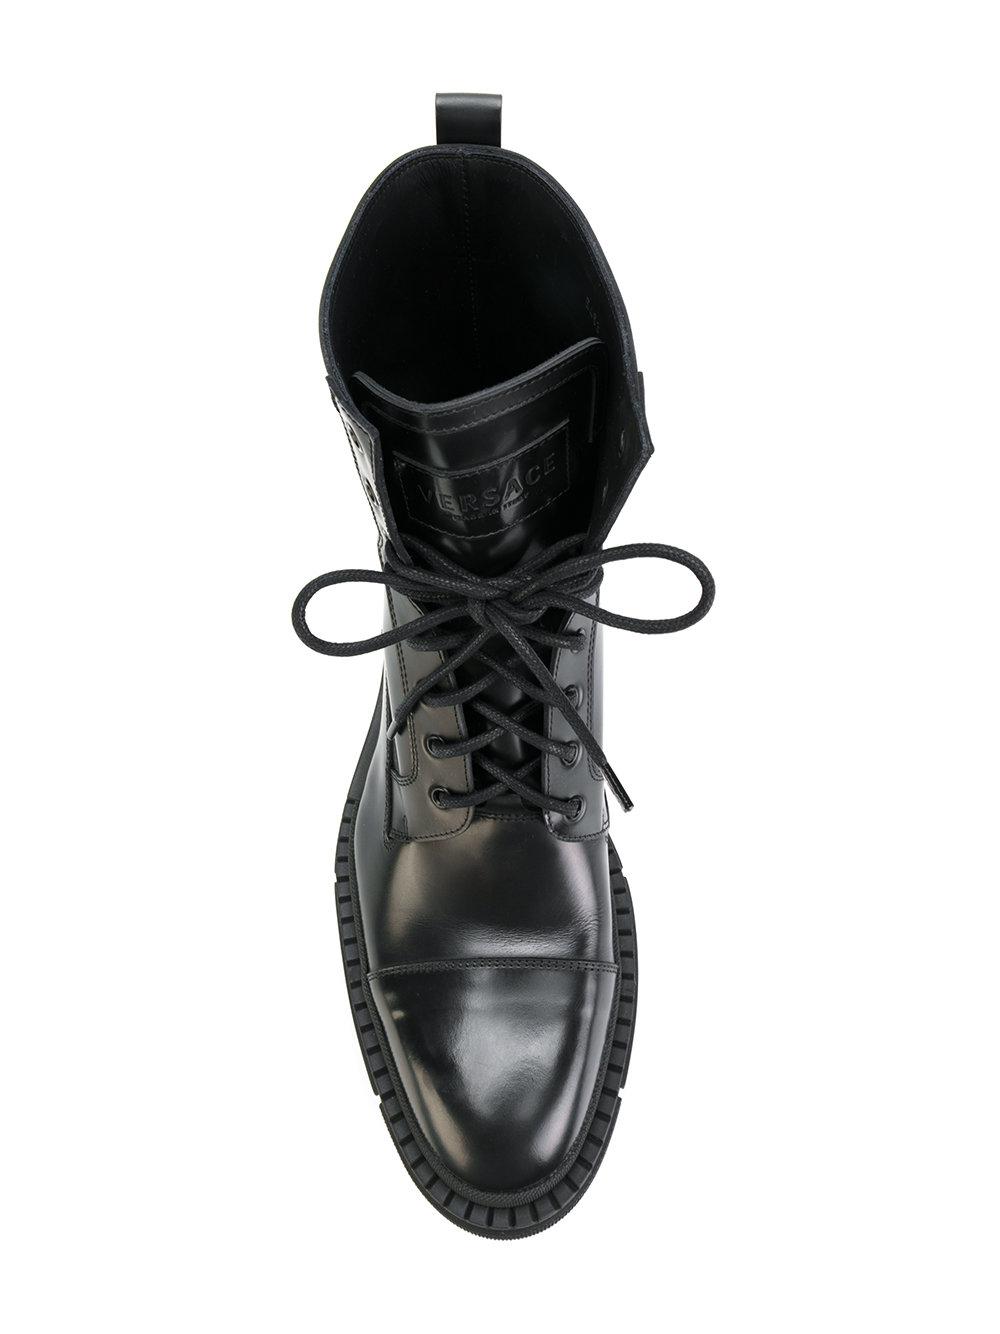 Versace Leather Cargo Boots in Black for Men - Lyst